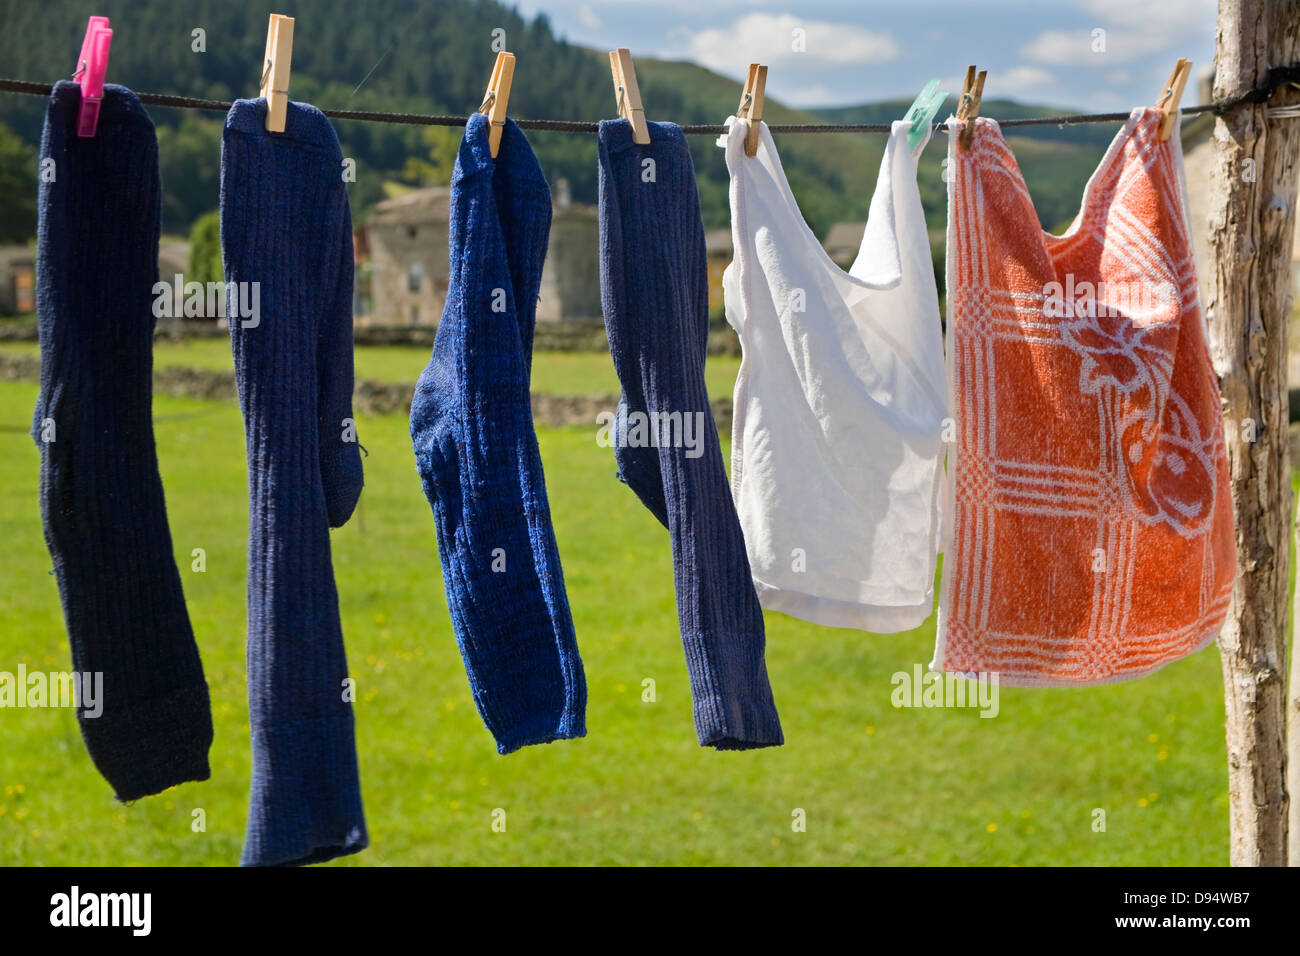 clothes hanging out to dry Stock Photo